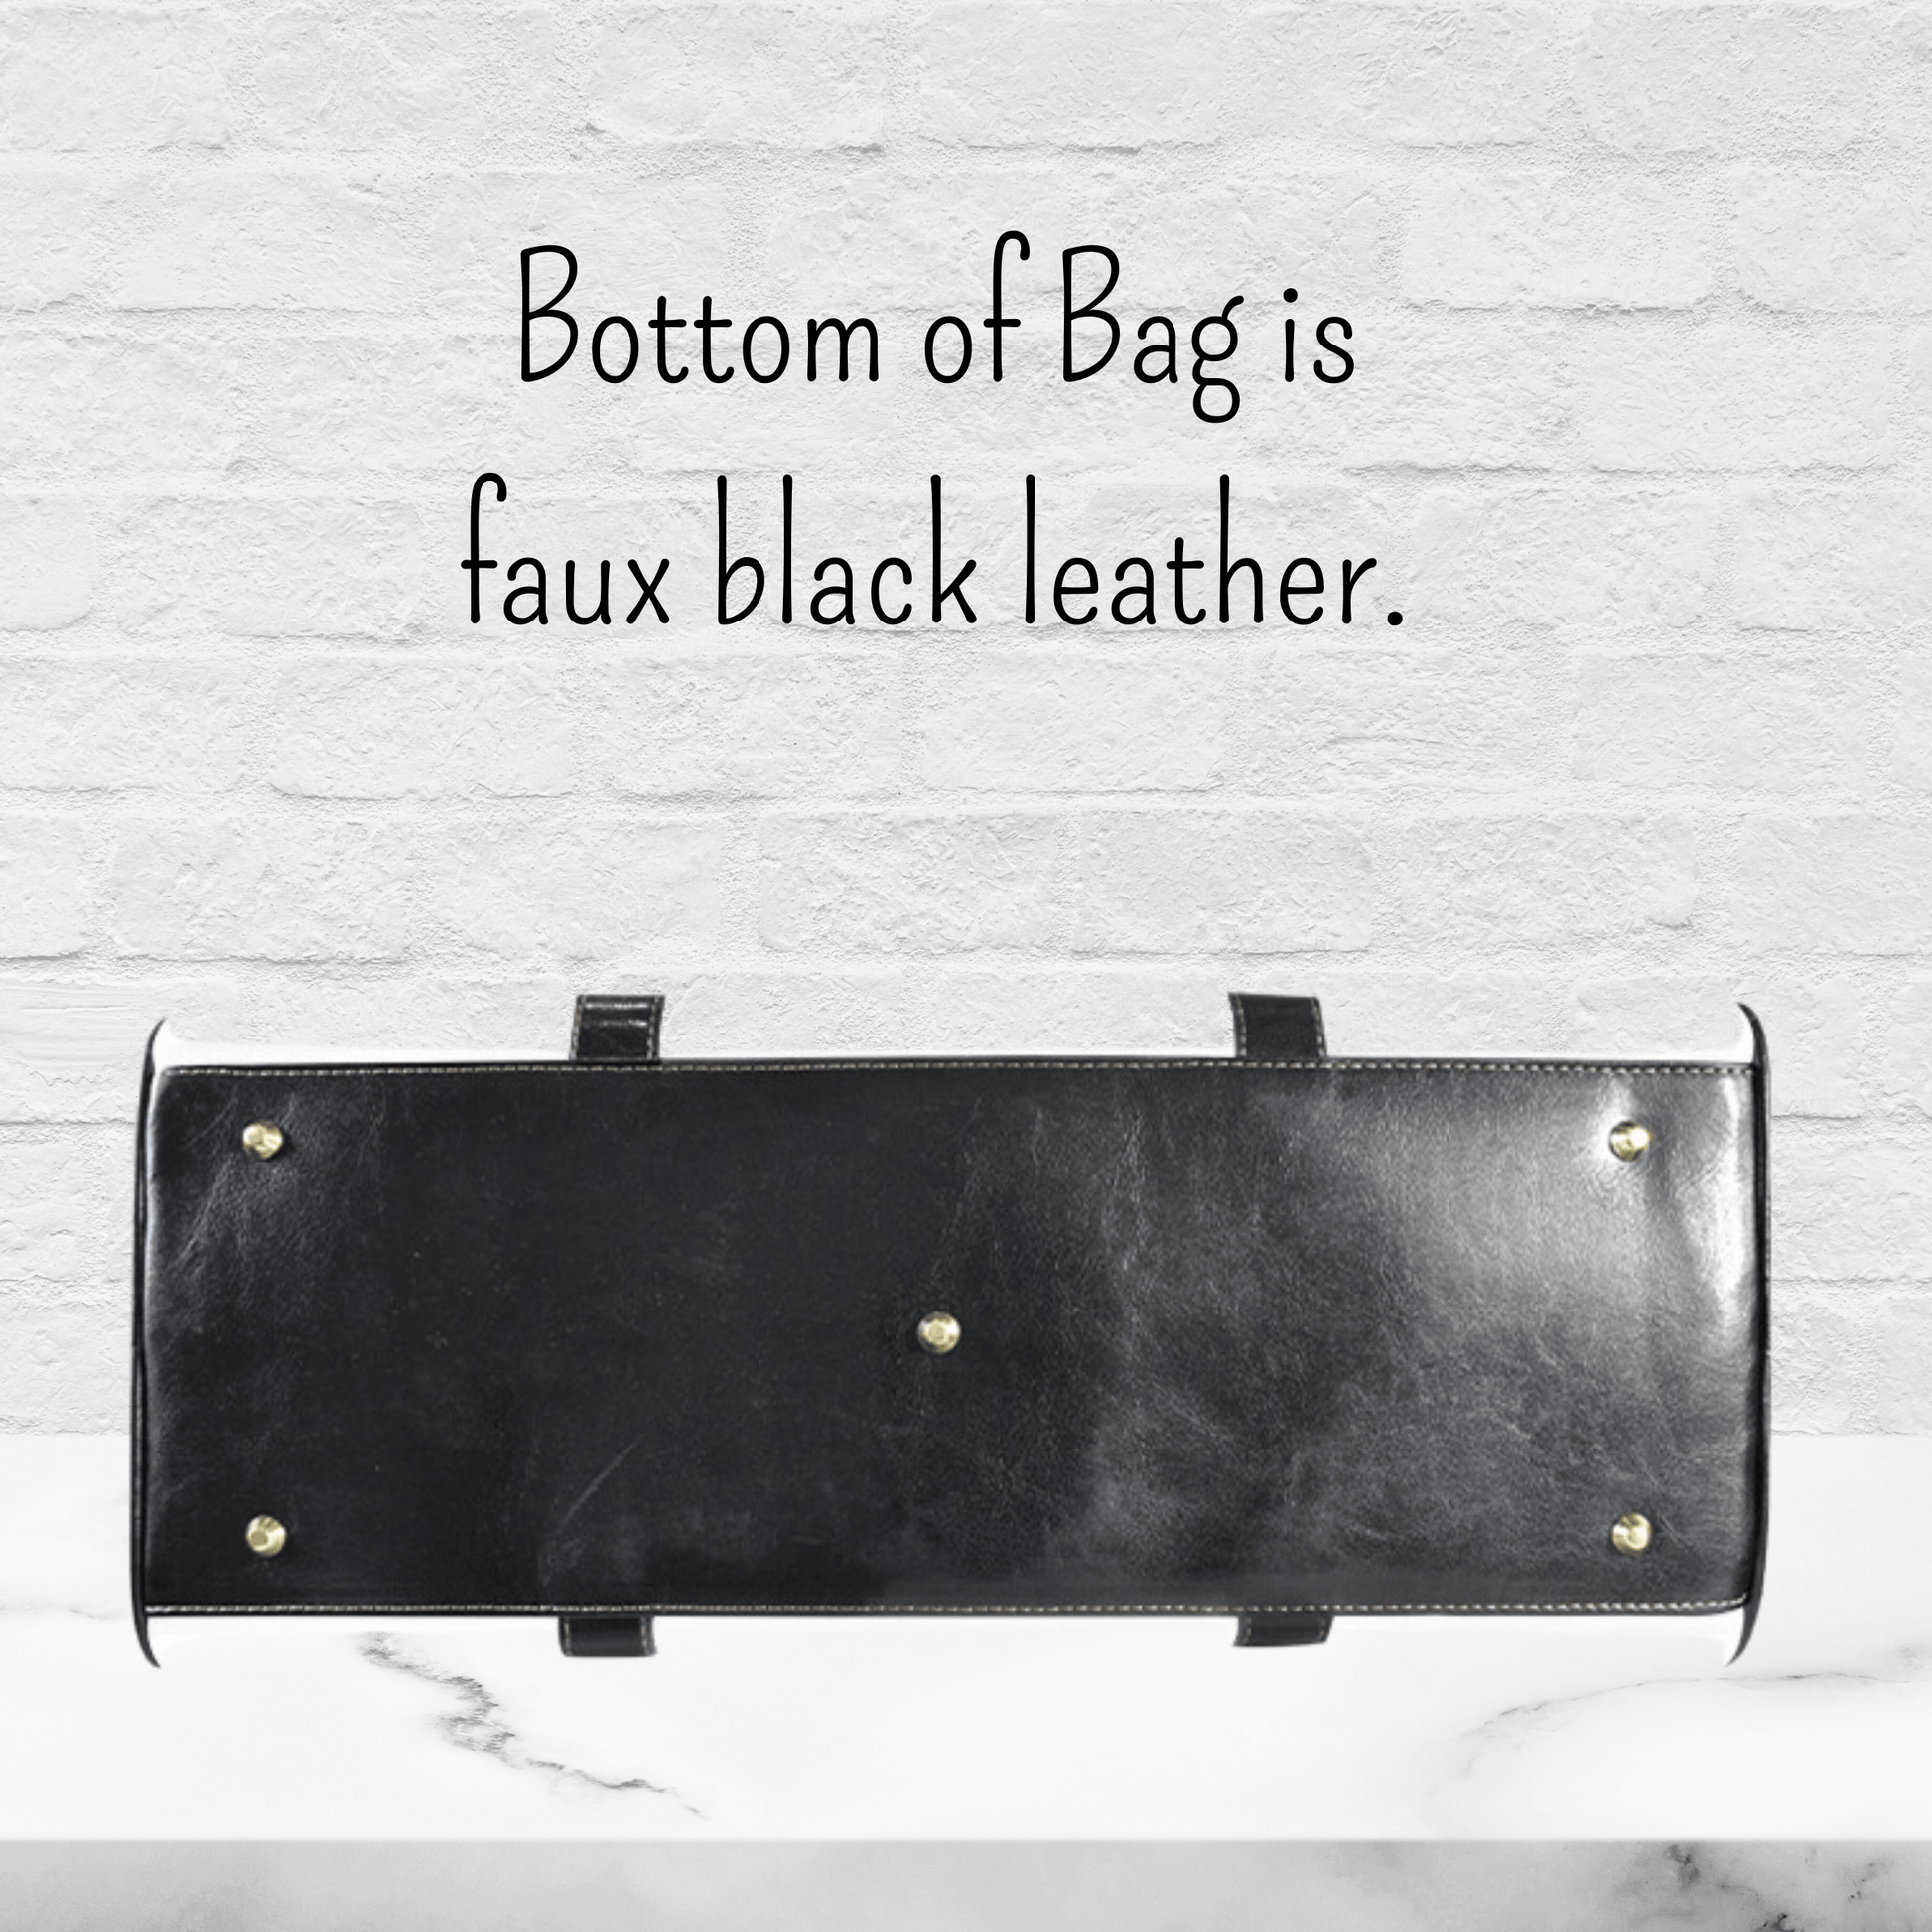 The bottom of the bag is made from faux black leather for added durability.